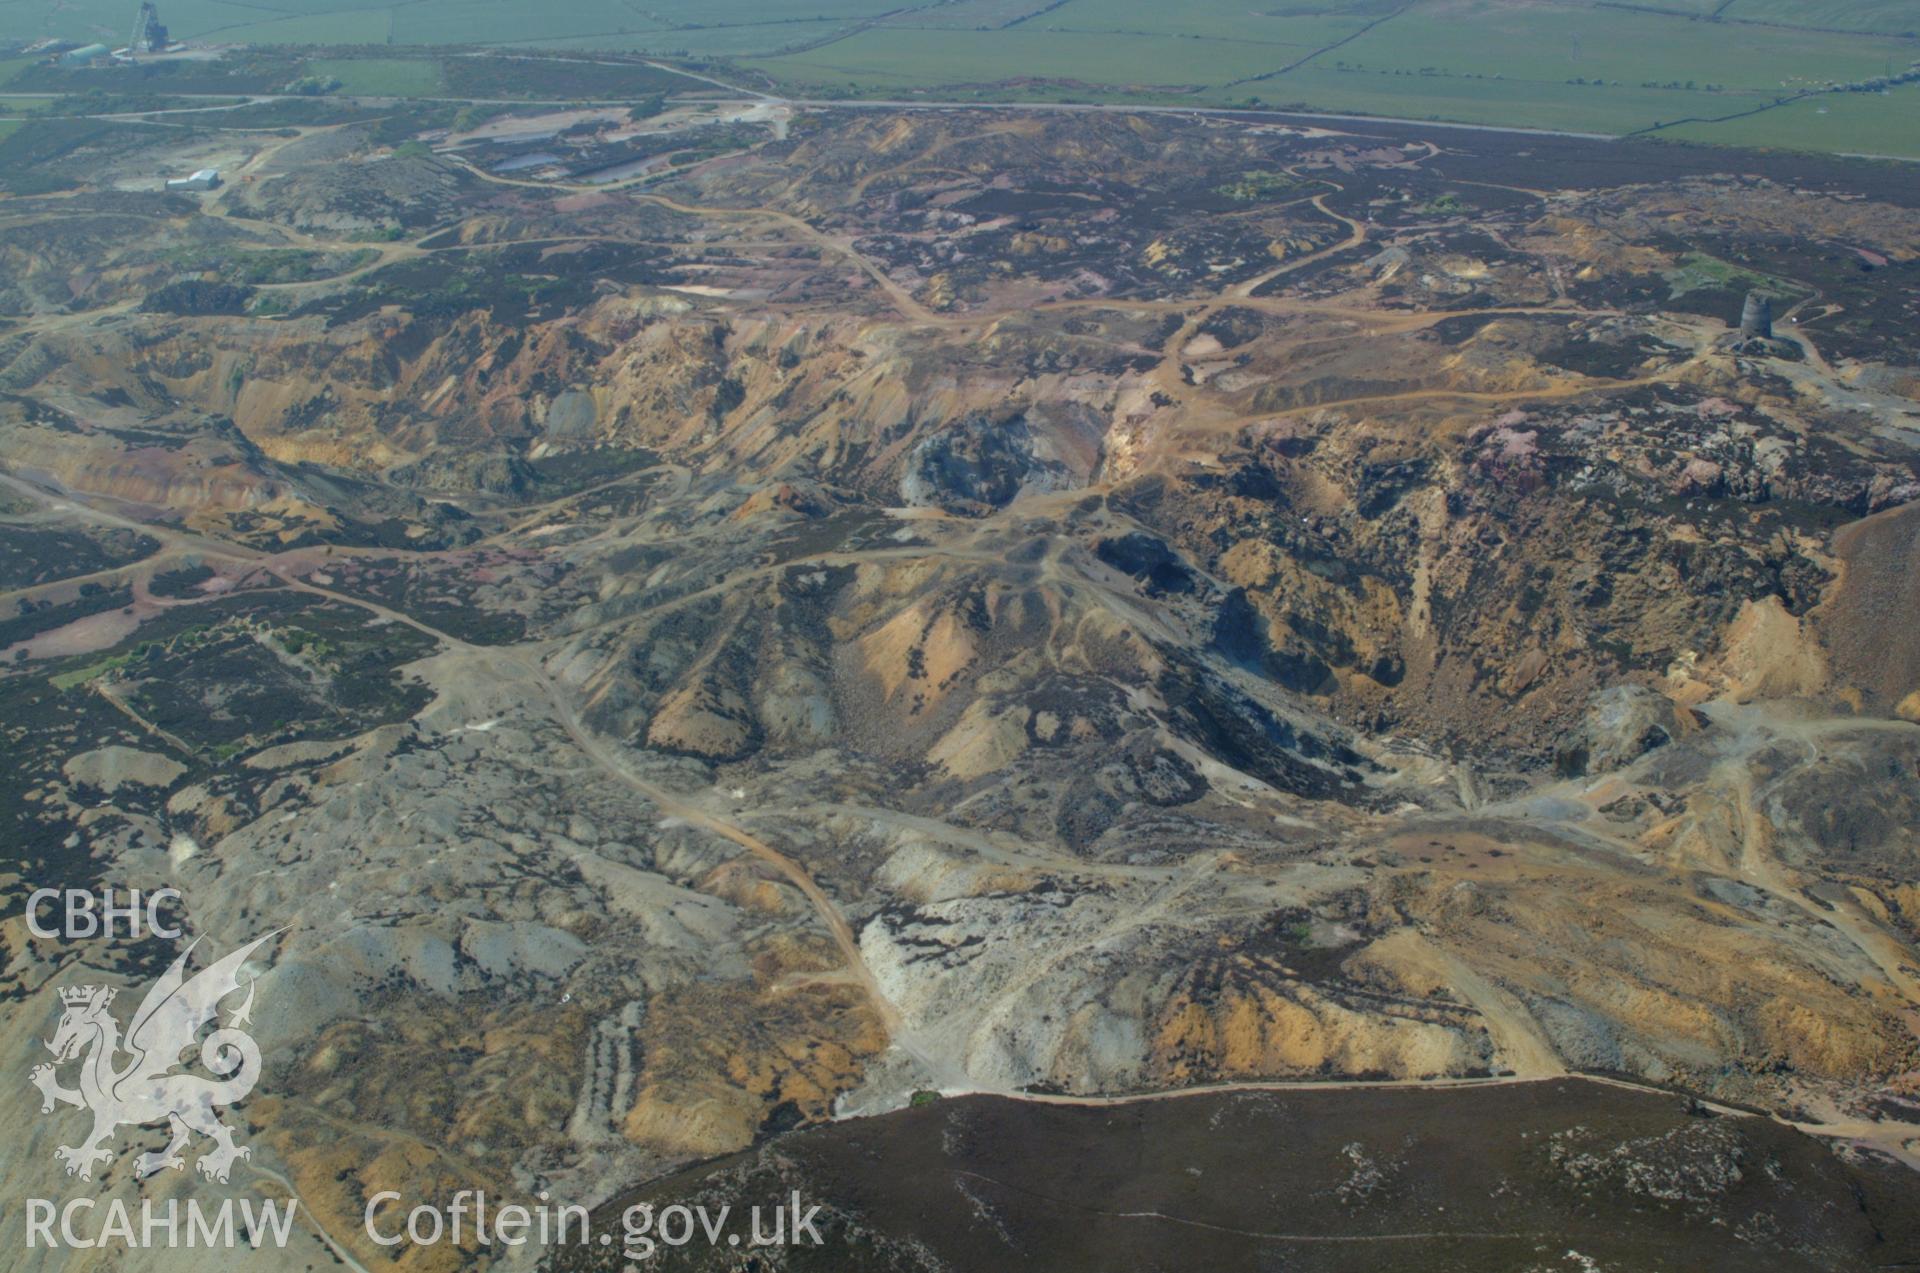 RCAHMW colour oblique aerial photograph of Parys Mountain showing Winding Gear in the distance. Taken on 26 May 2004 by Toby Driver